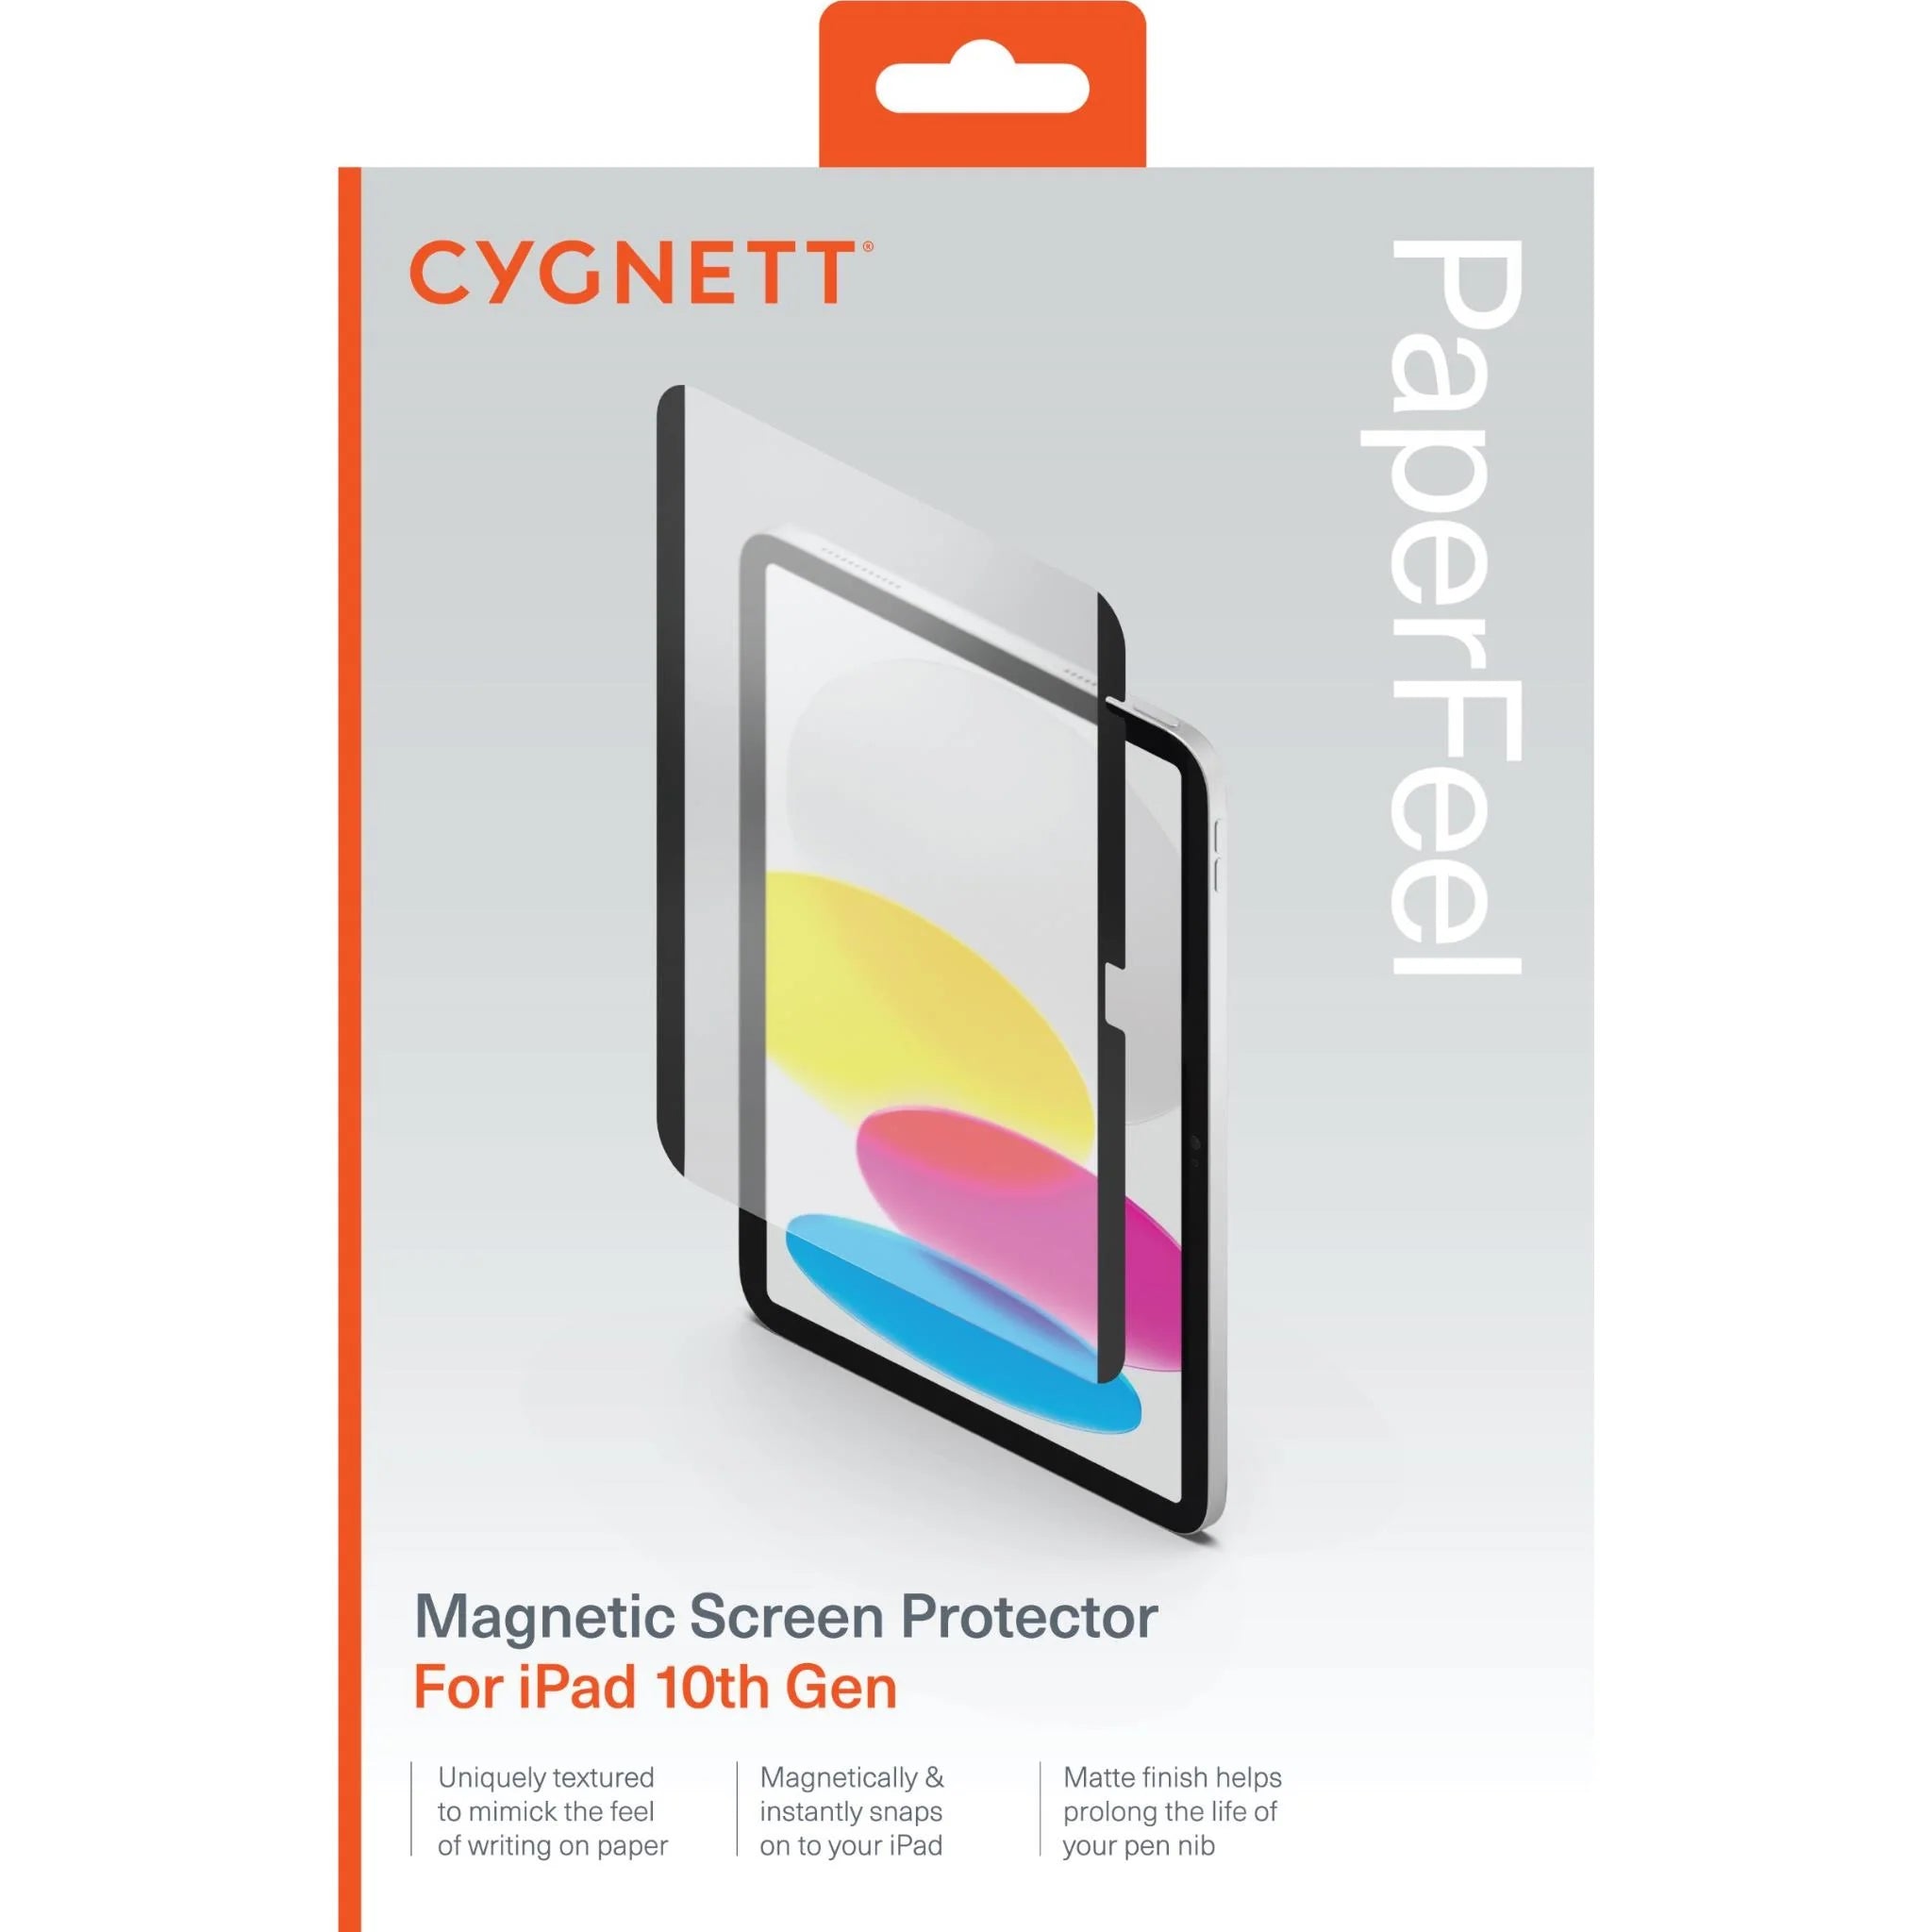 Cygnett Magnetic PaperFeel Screen Protector for iPad 10th Gen